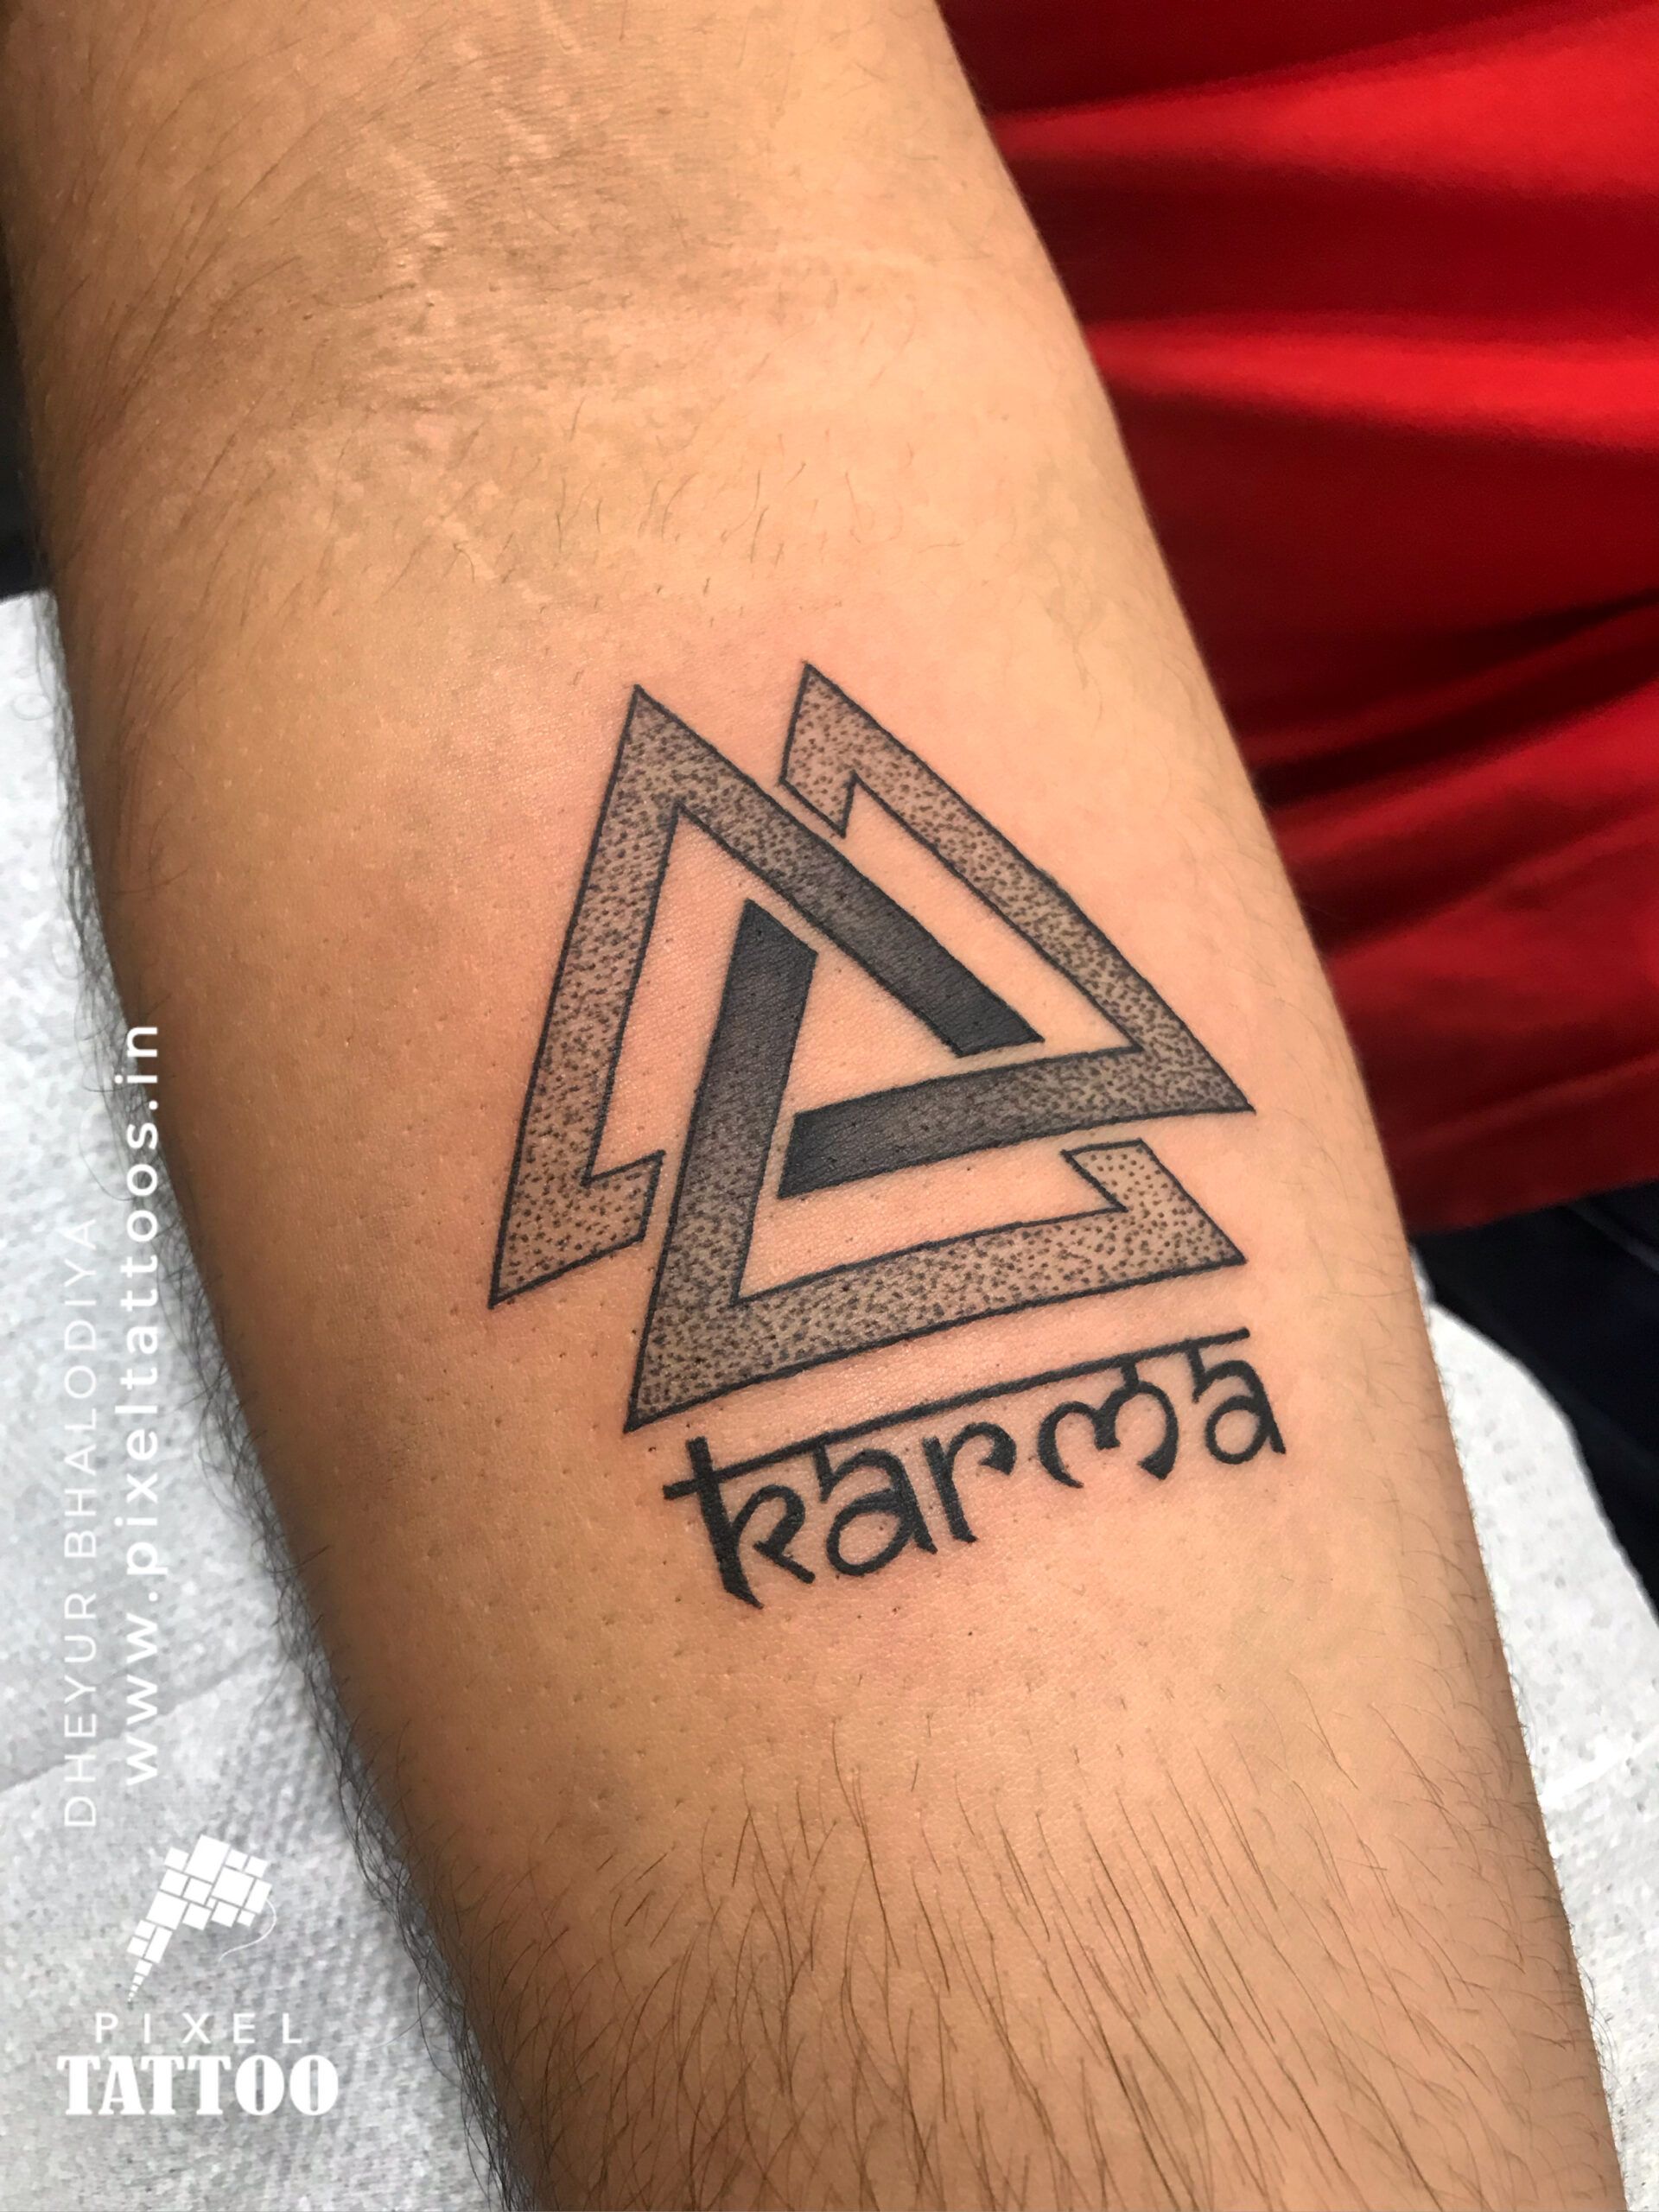 Cover-up Tattoos - Pixel Tattoos at Rs 500/square inch in Surat